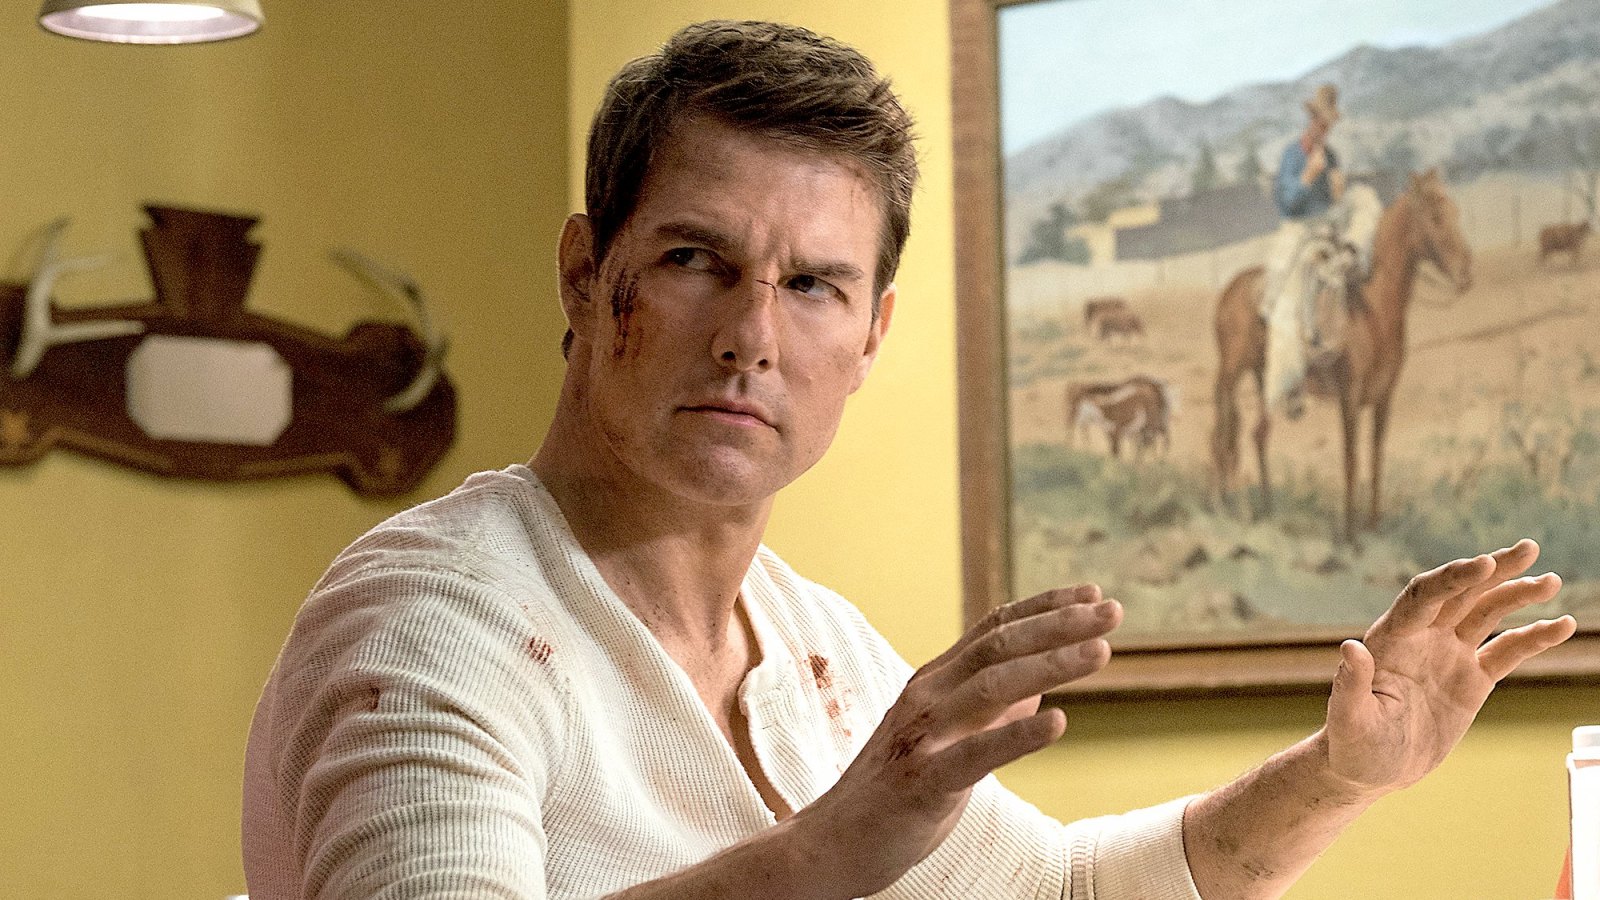 Jack Reacher Tom Cruise too old action movies